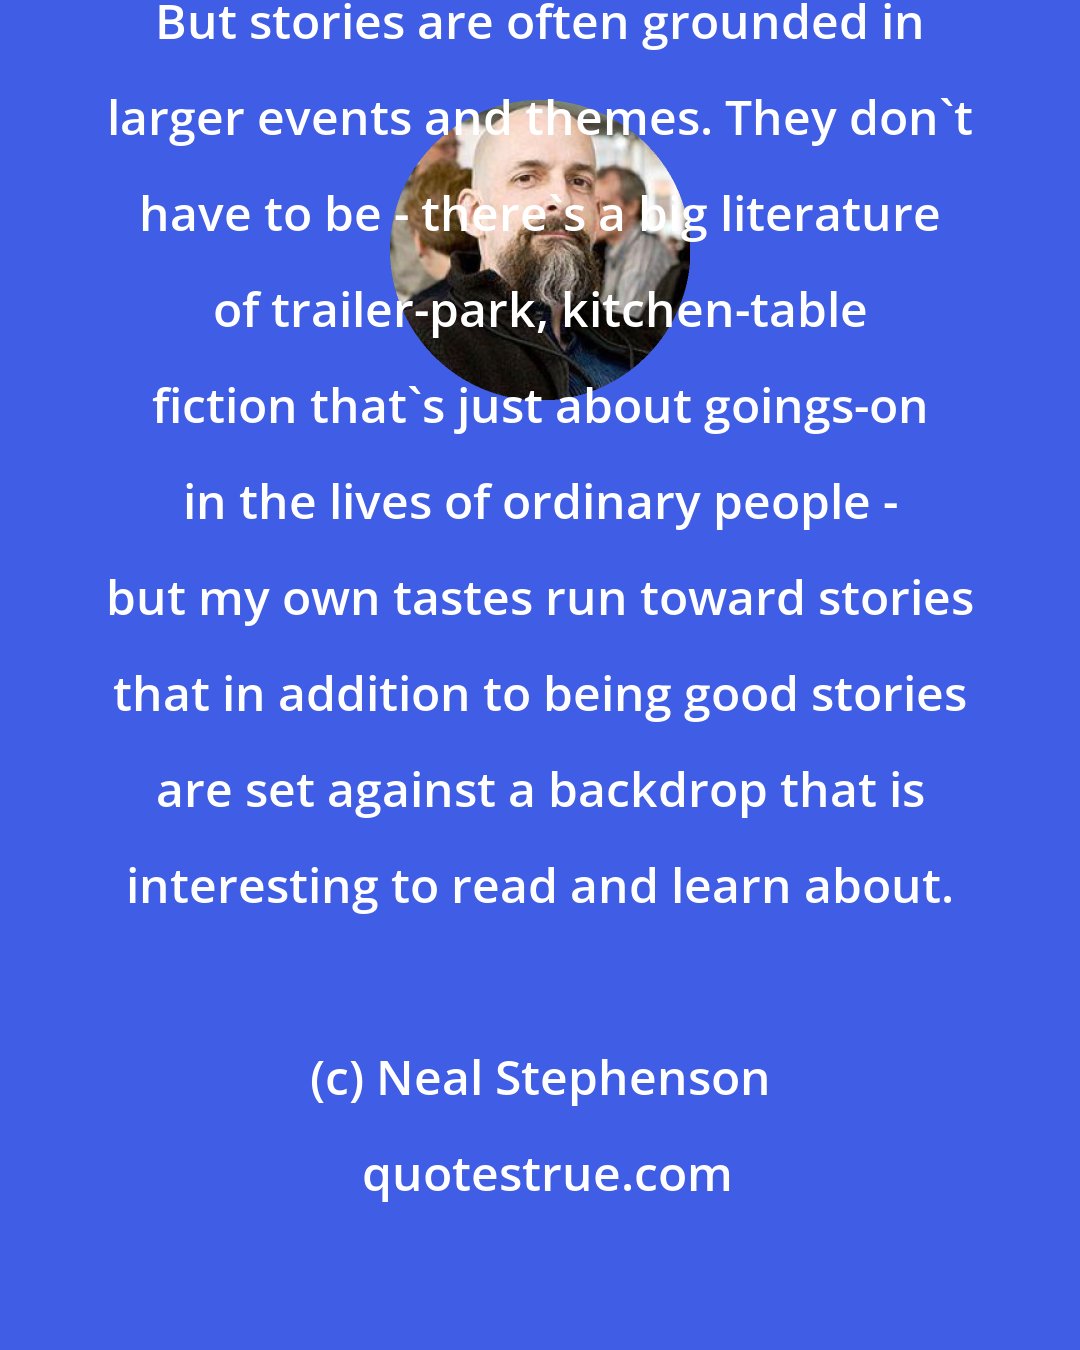 Neal Stephenson: I really am just trying to tell stories. But stories are often grounded in larger events and themes. They don't have to be - there's a big literature of trailer-park, kitchen-table fiction that's just about goings-on in the lives of ordinary people - but my own tastes run toward stories that in addition to being good stories are set against a backdrop that is interesting to read and learn about.